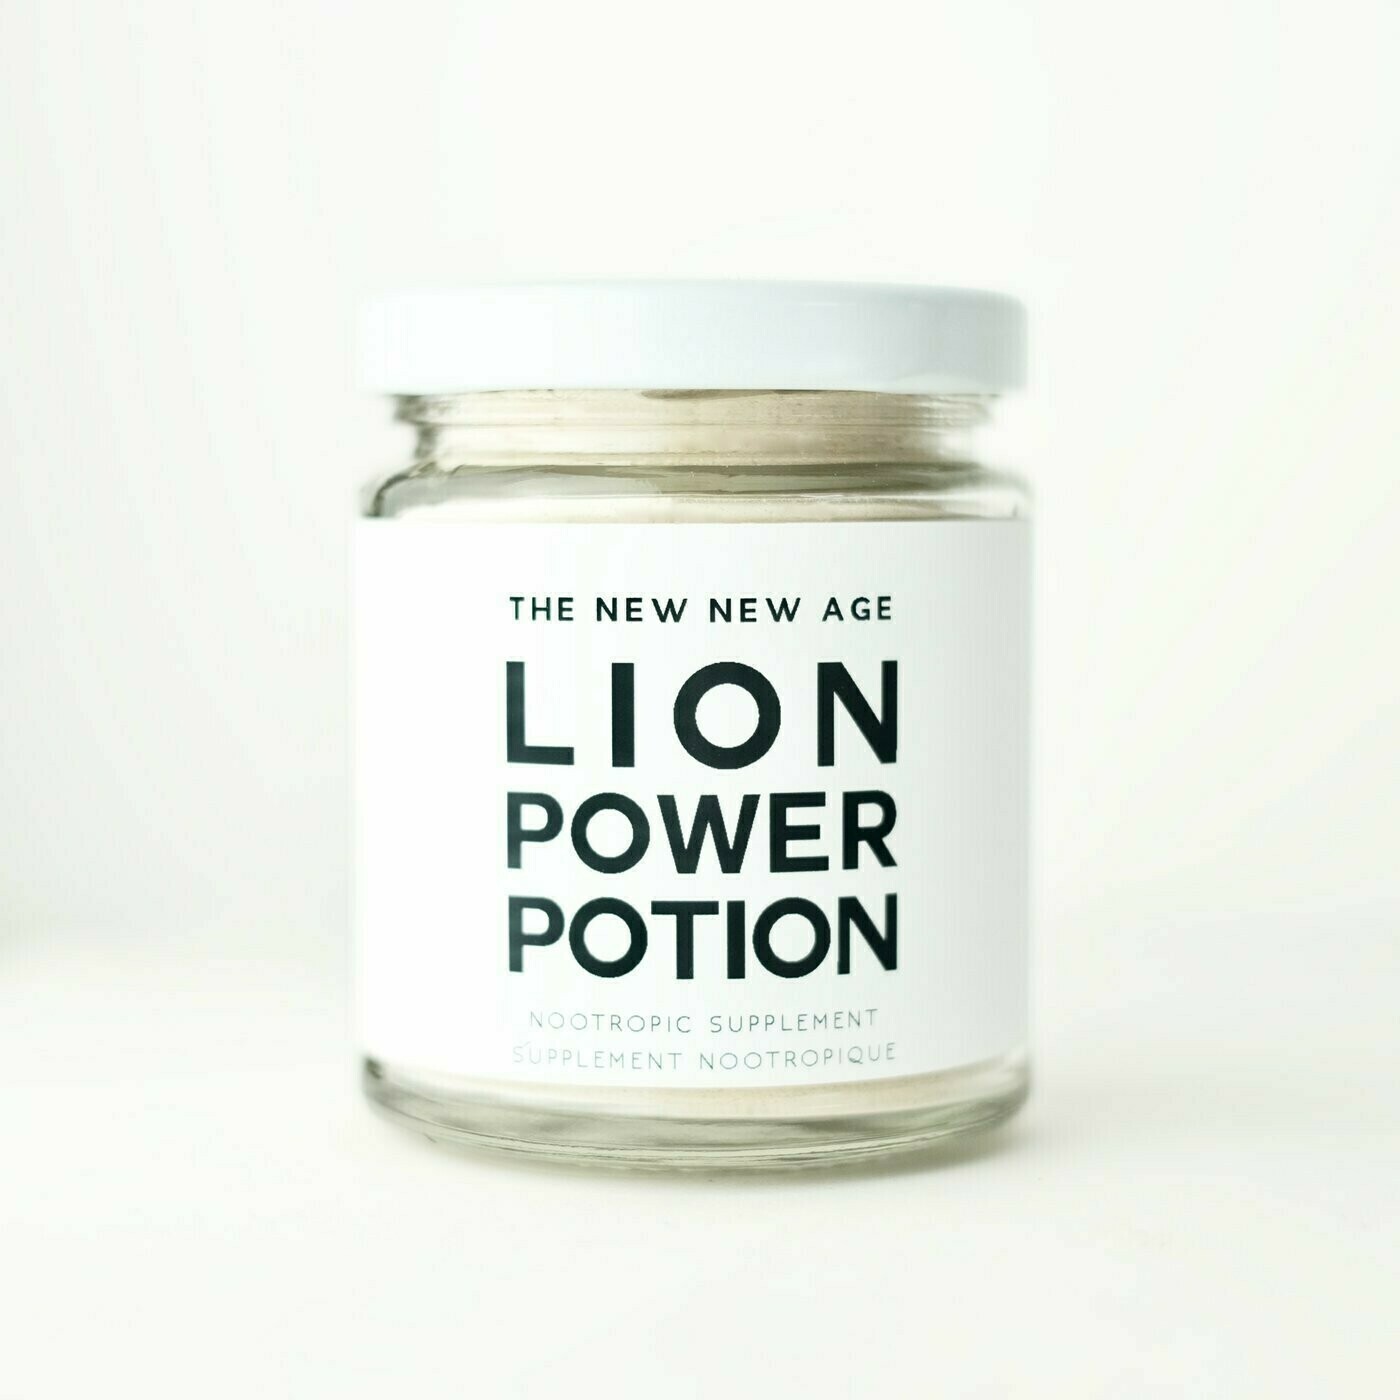 The New New Age Lion Power Potion